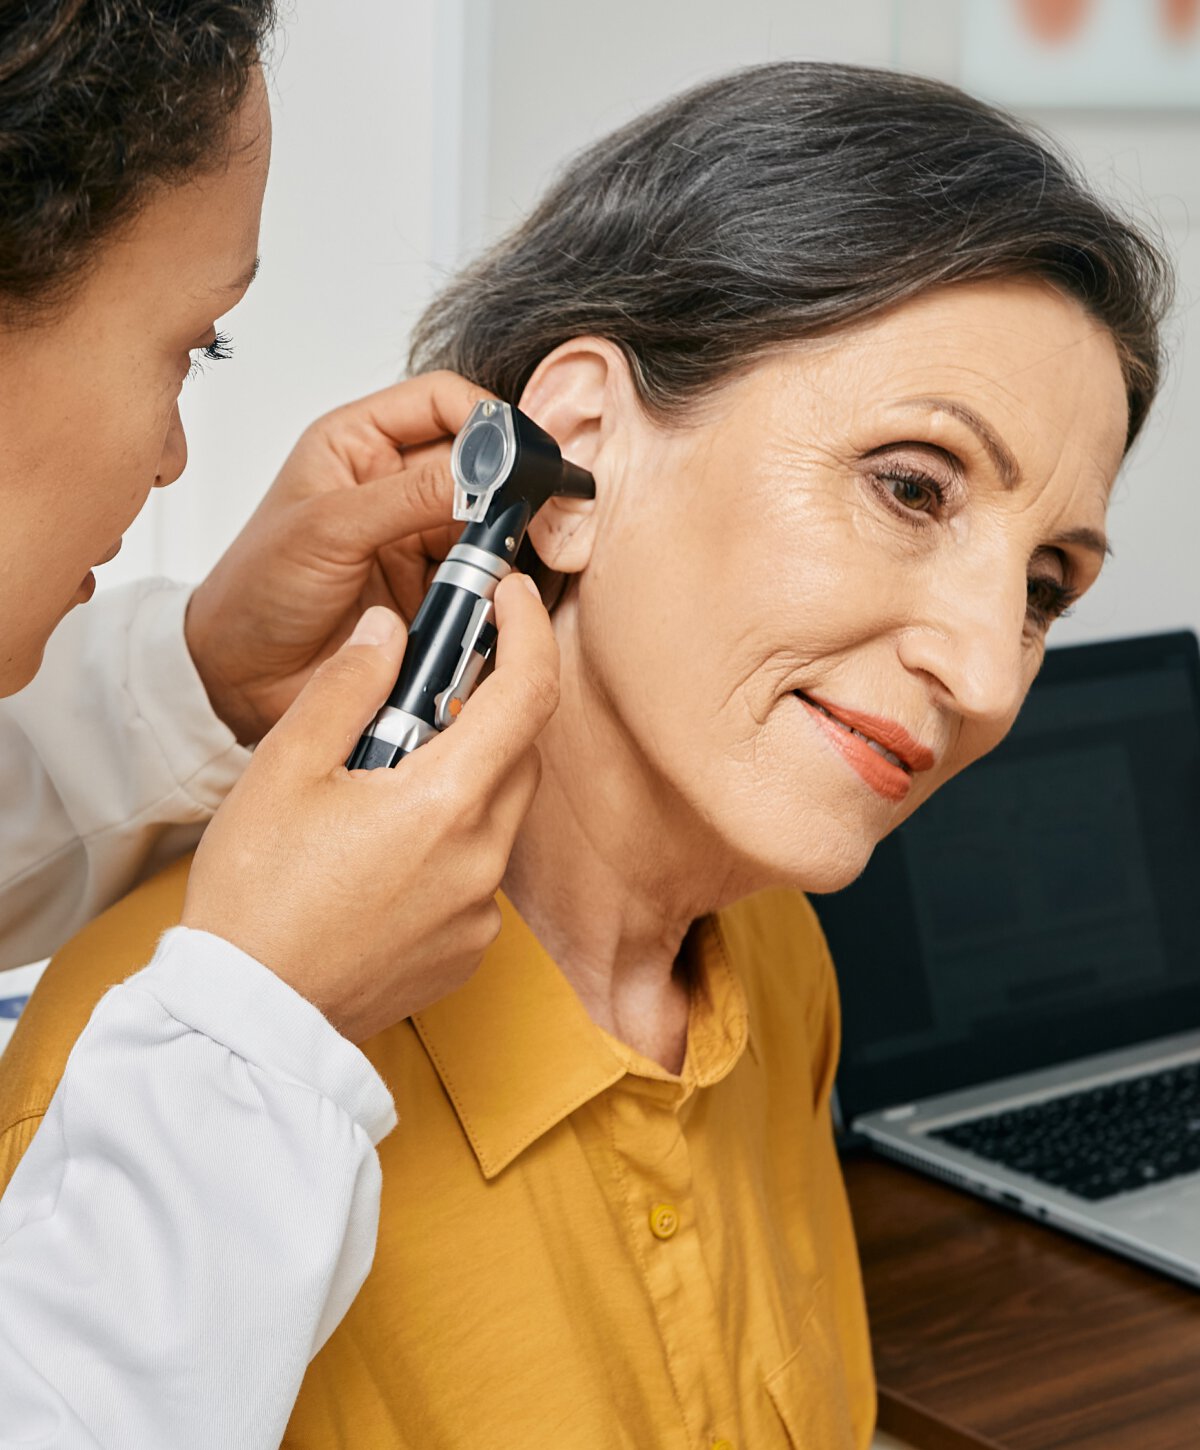 Hollywood doctor doing ear testing on female patient